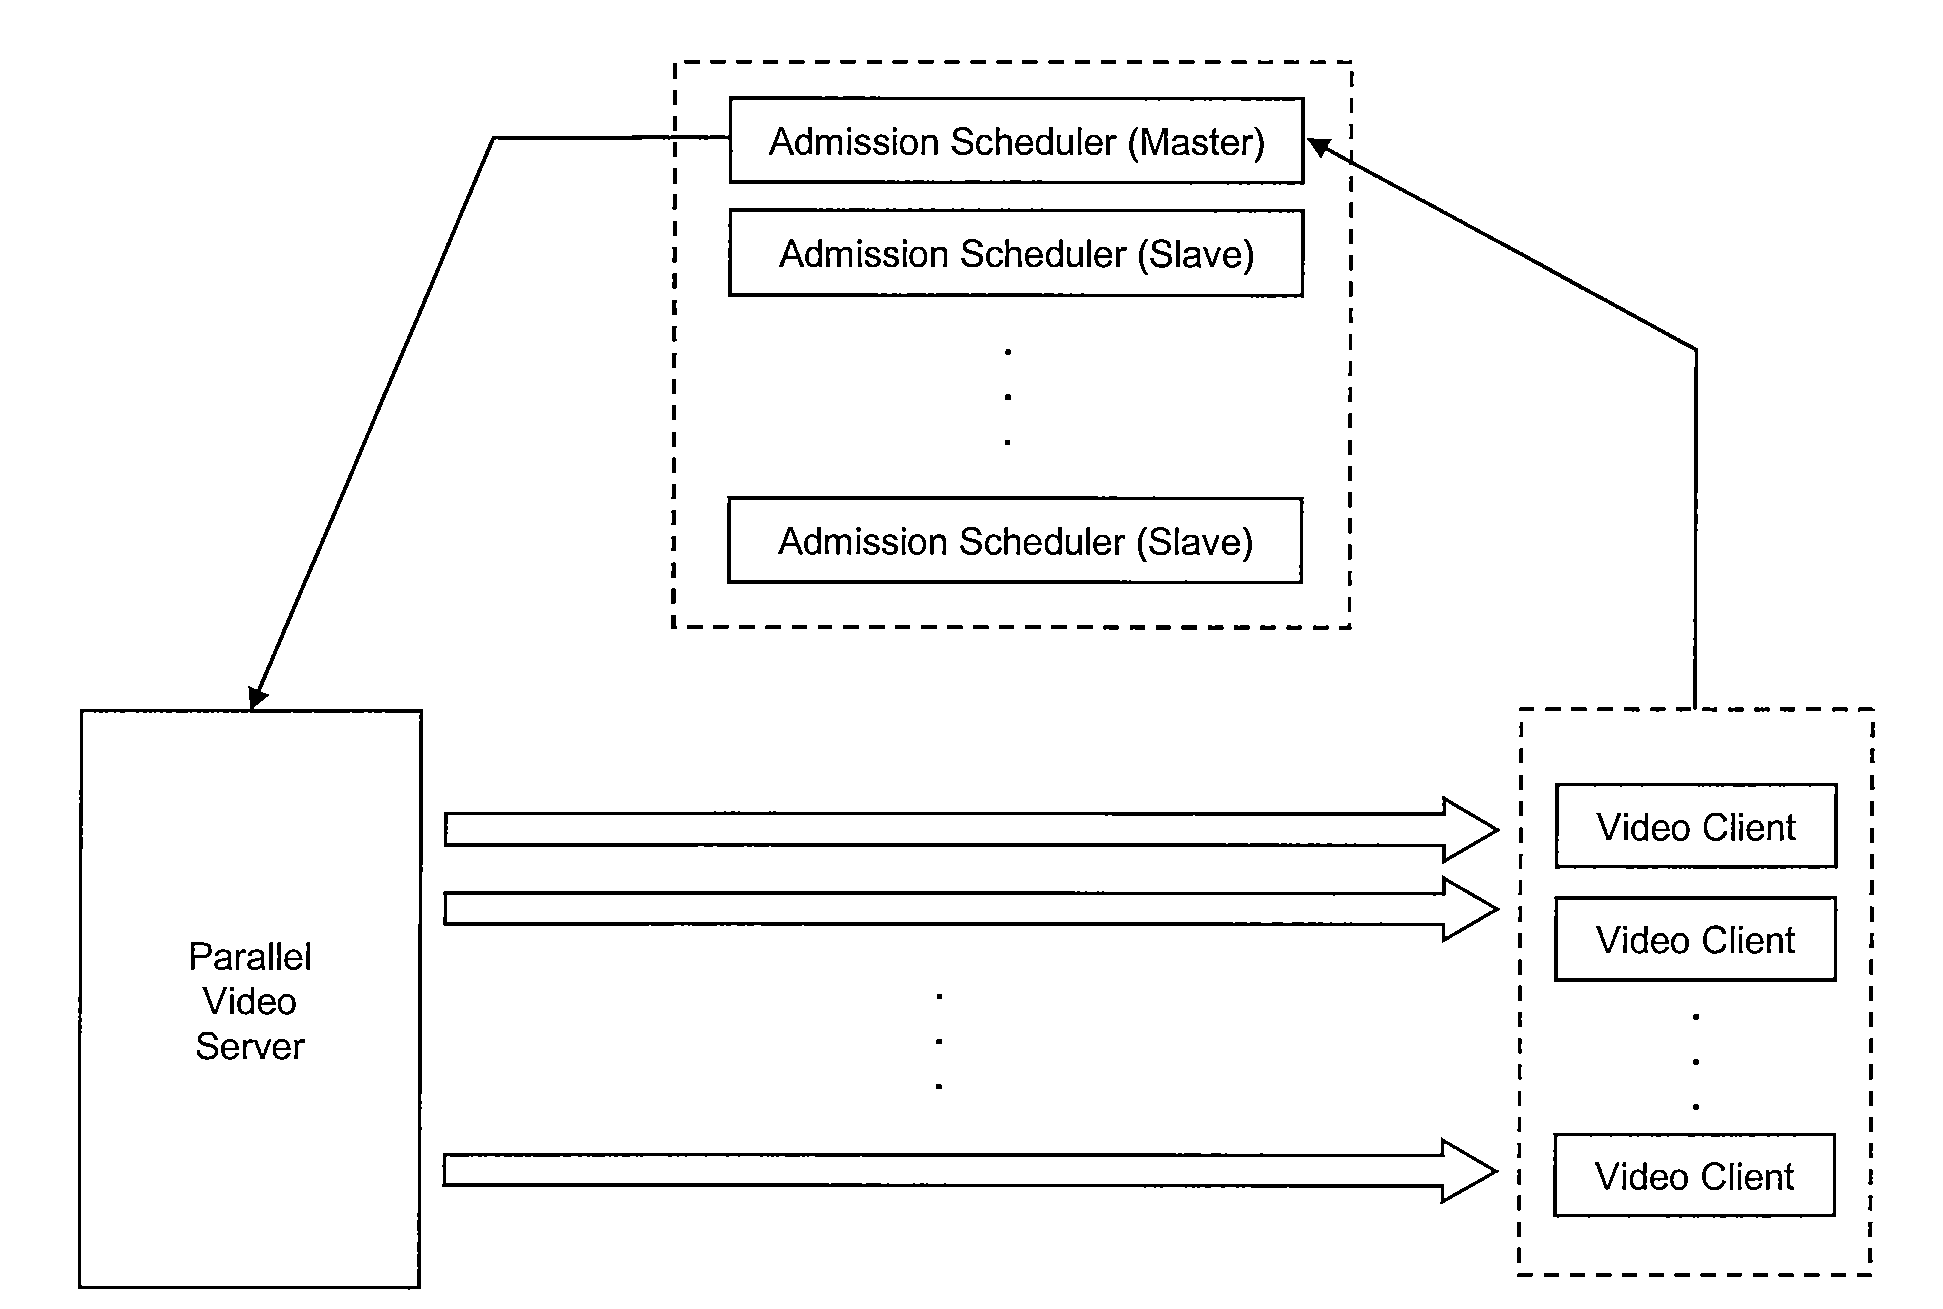 Load balancing and admission scheduling in pull-based parallel video servers